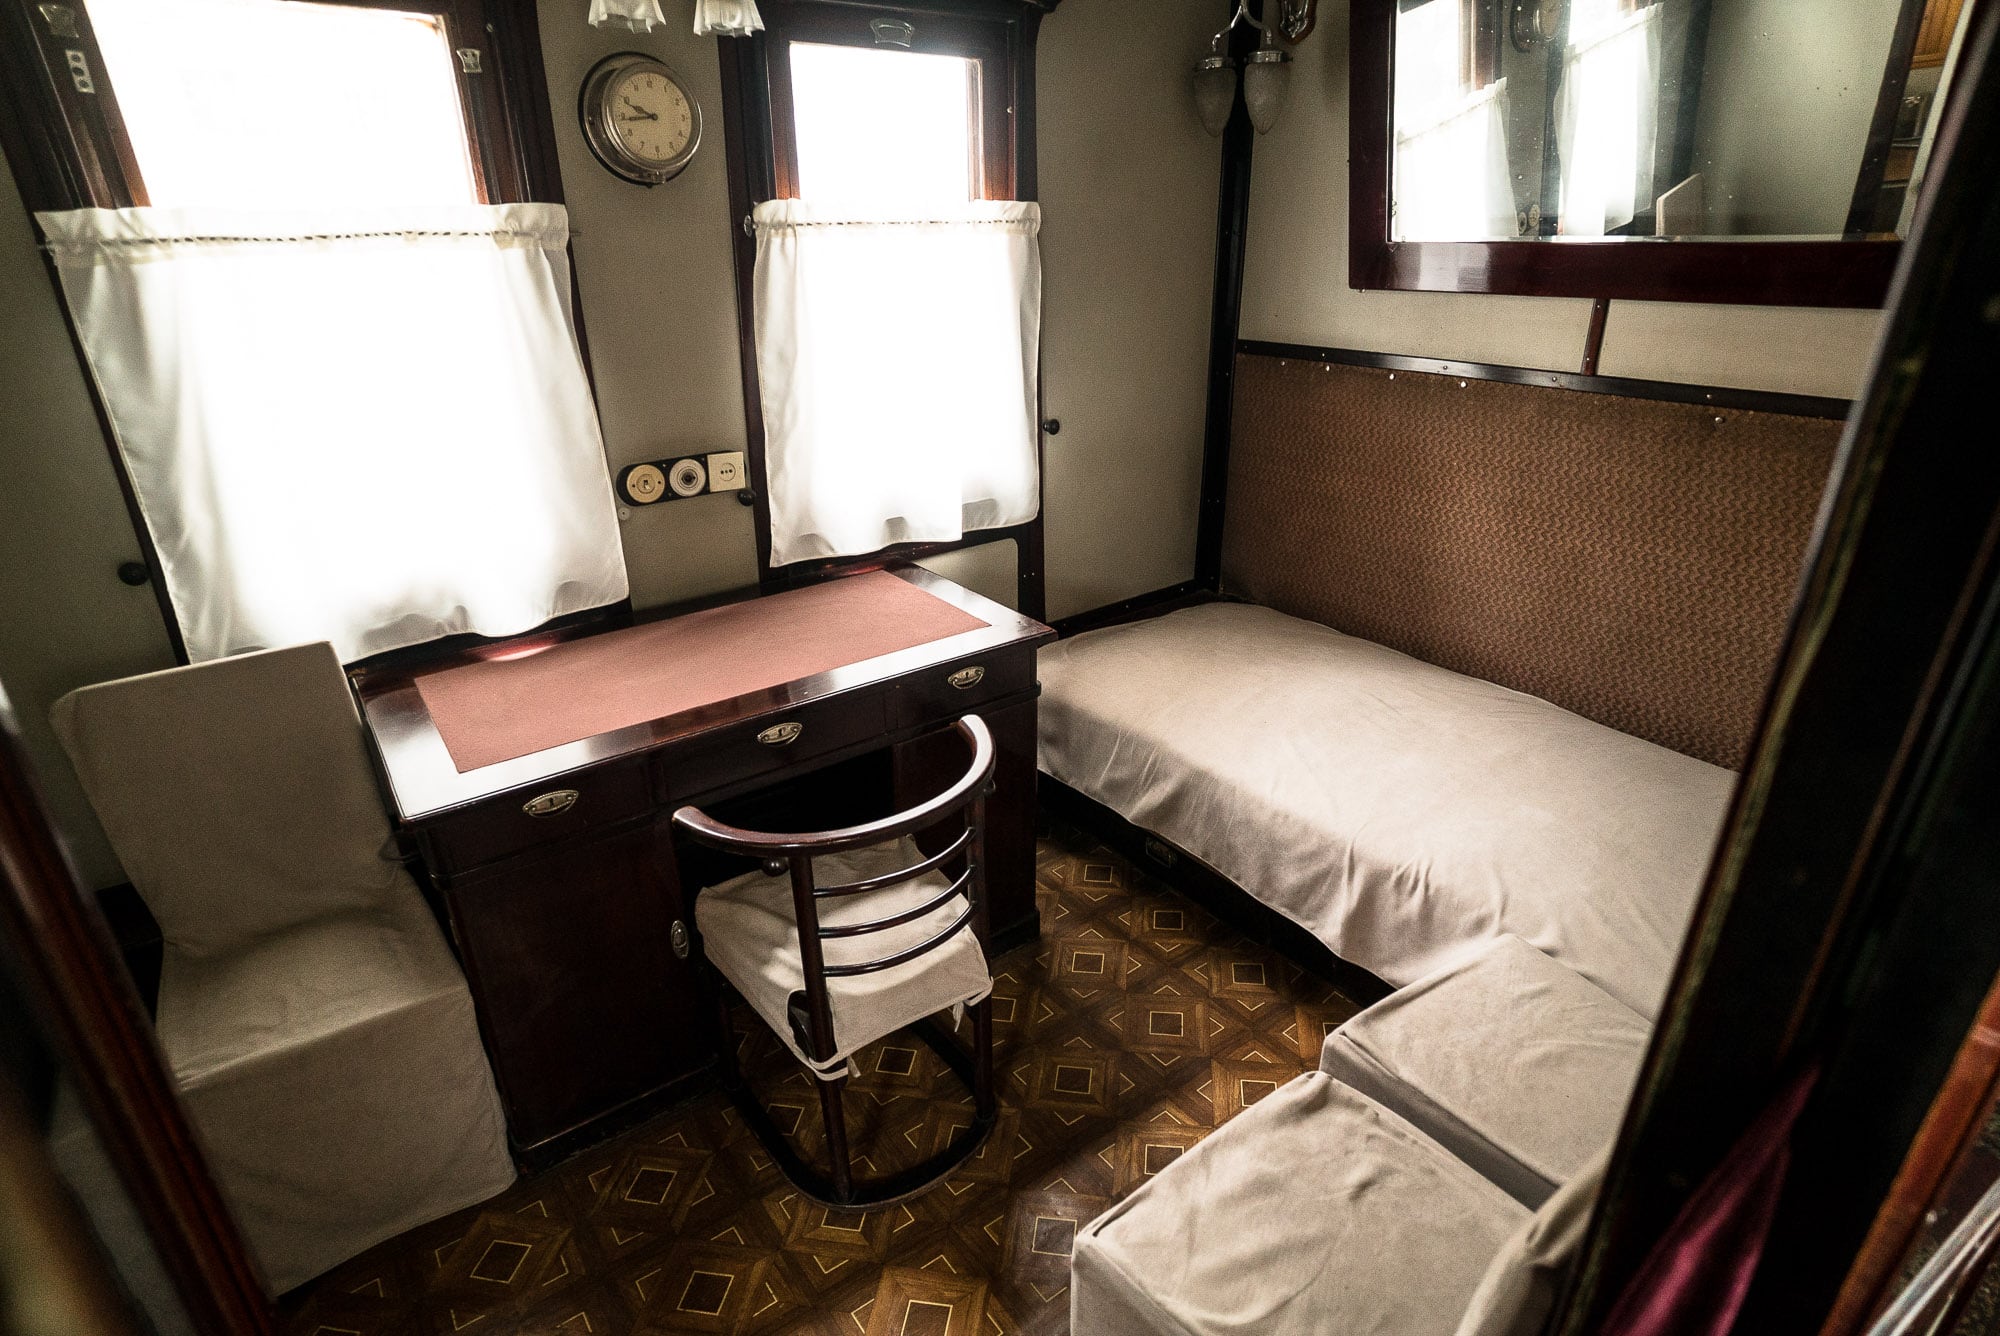 Stalin's room on his train